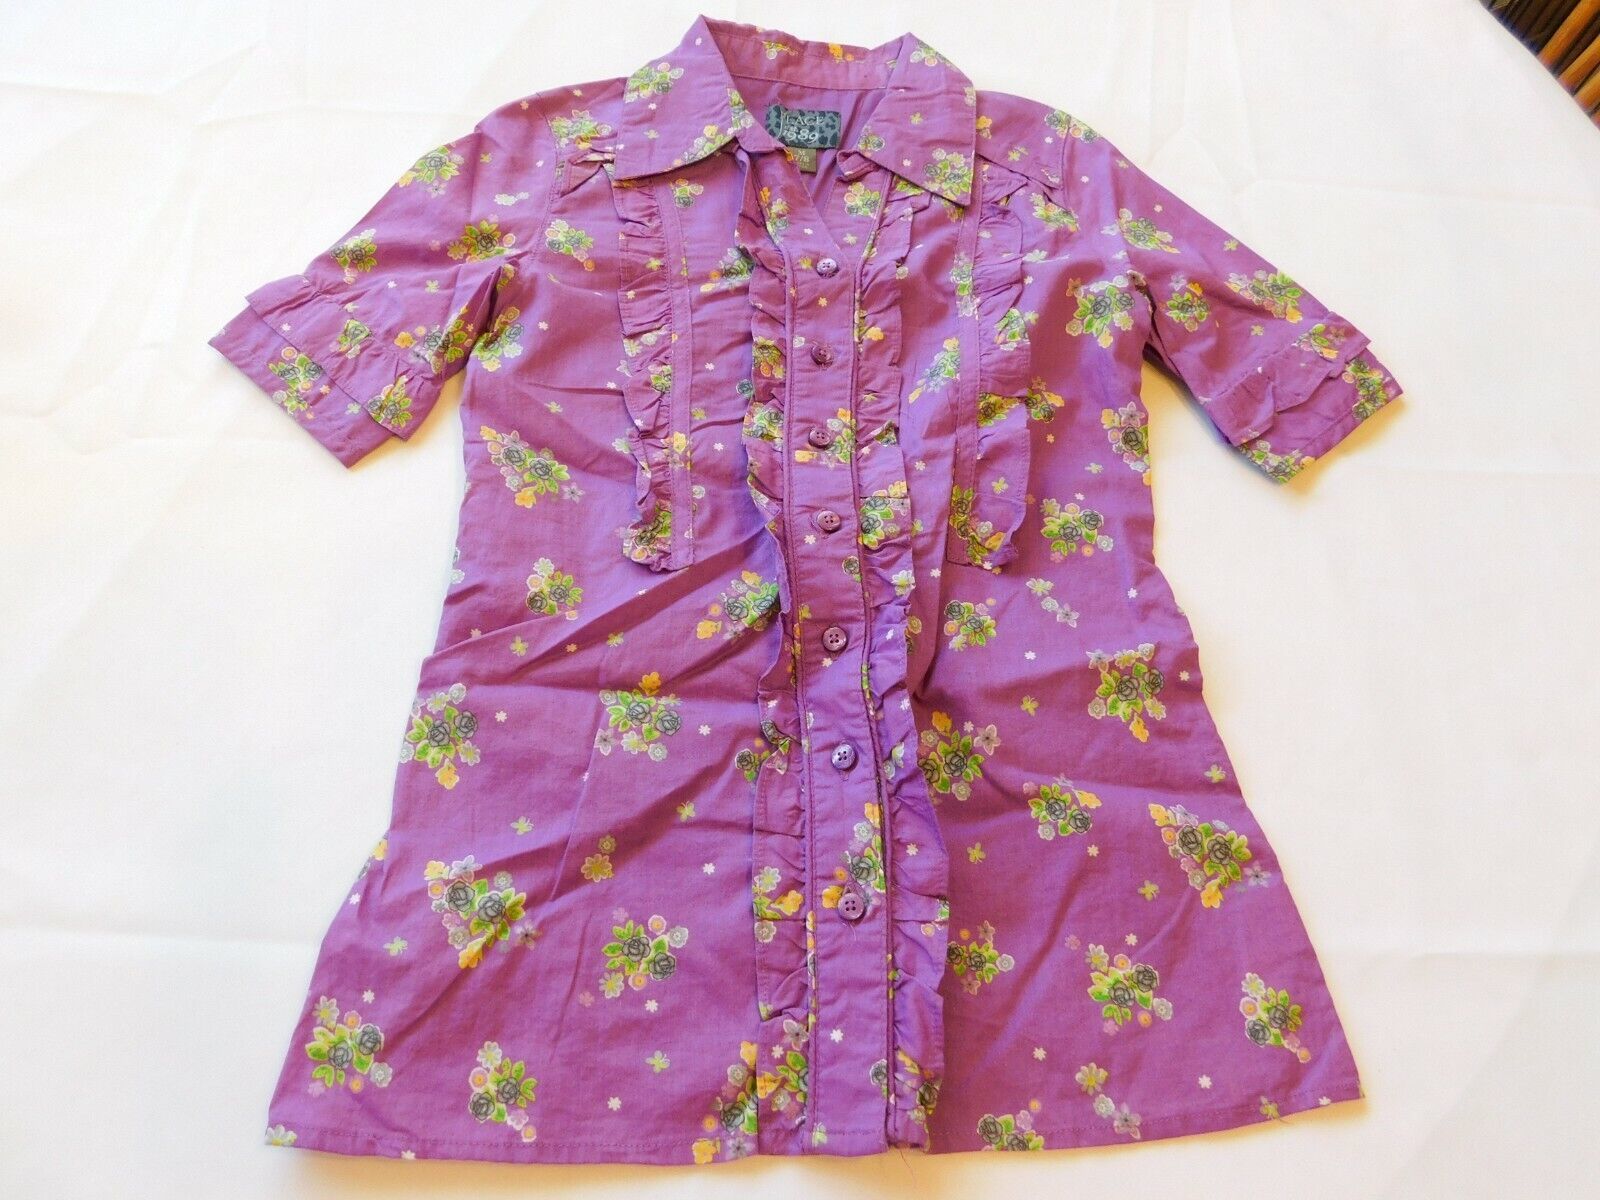 The Children's Place Youth Girl's Short Sleeve Button Up Shirt Size M 7/8 NWT - $15.59